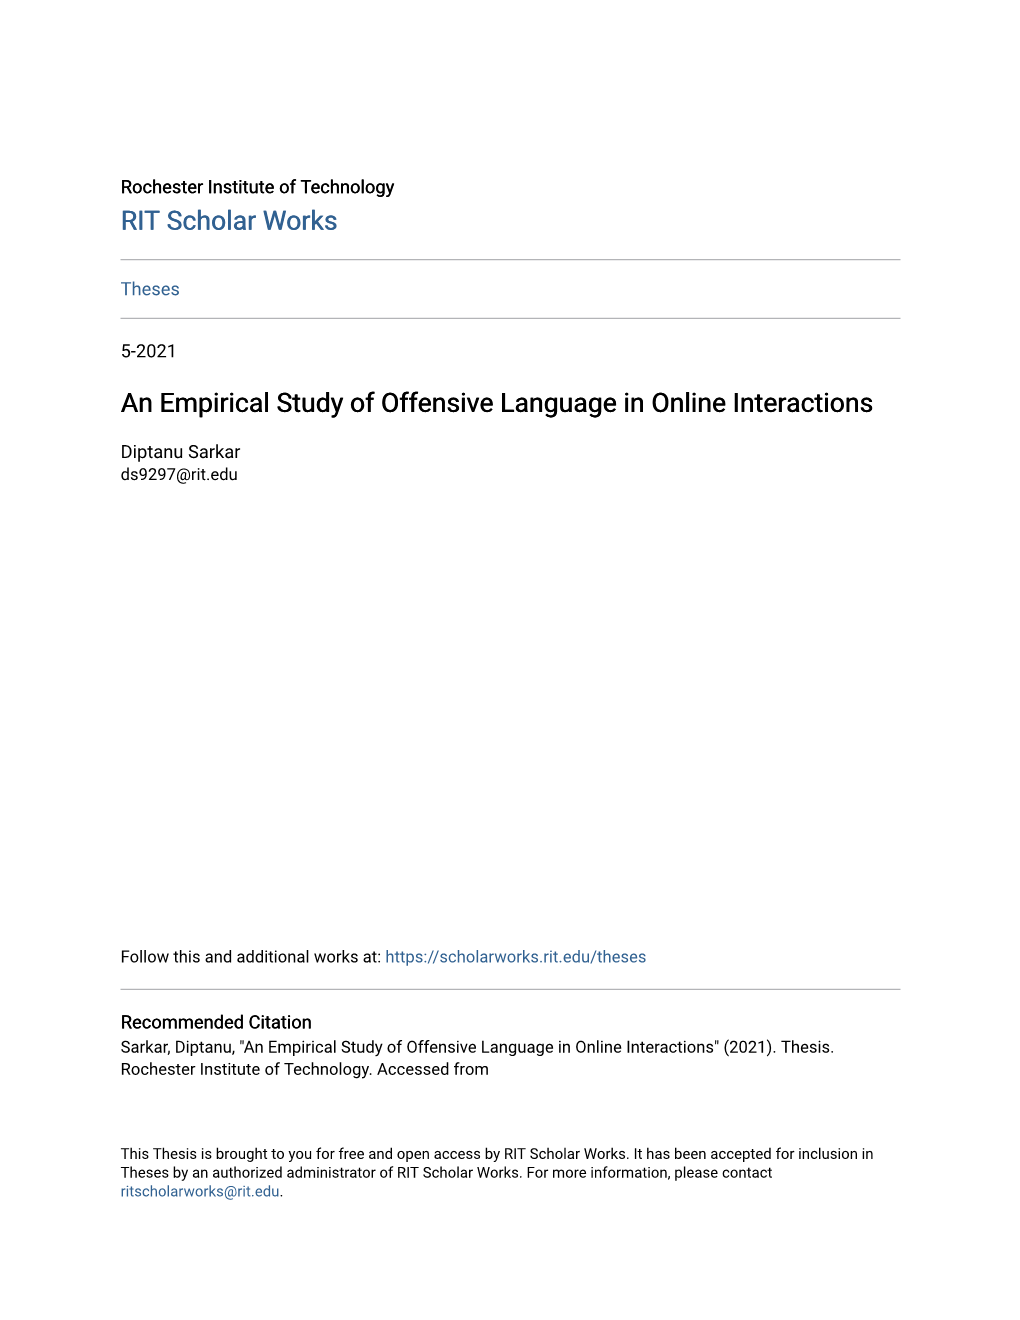 An Empirical Study of Offensive Language in Online Interactions